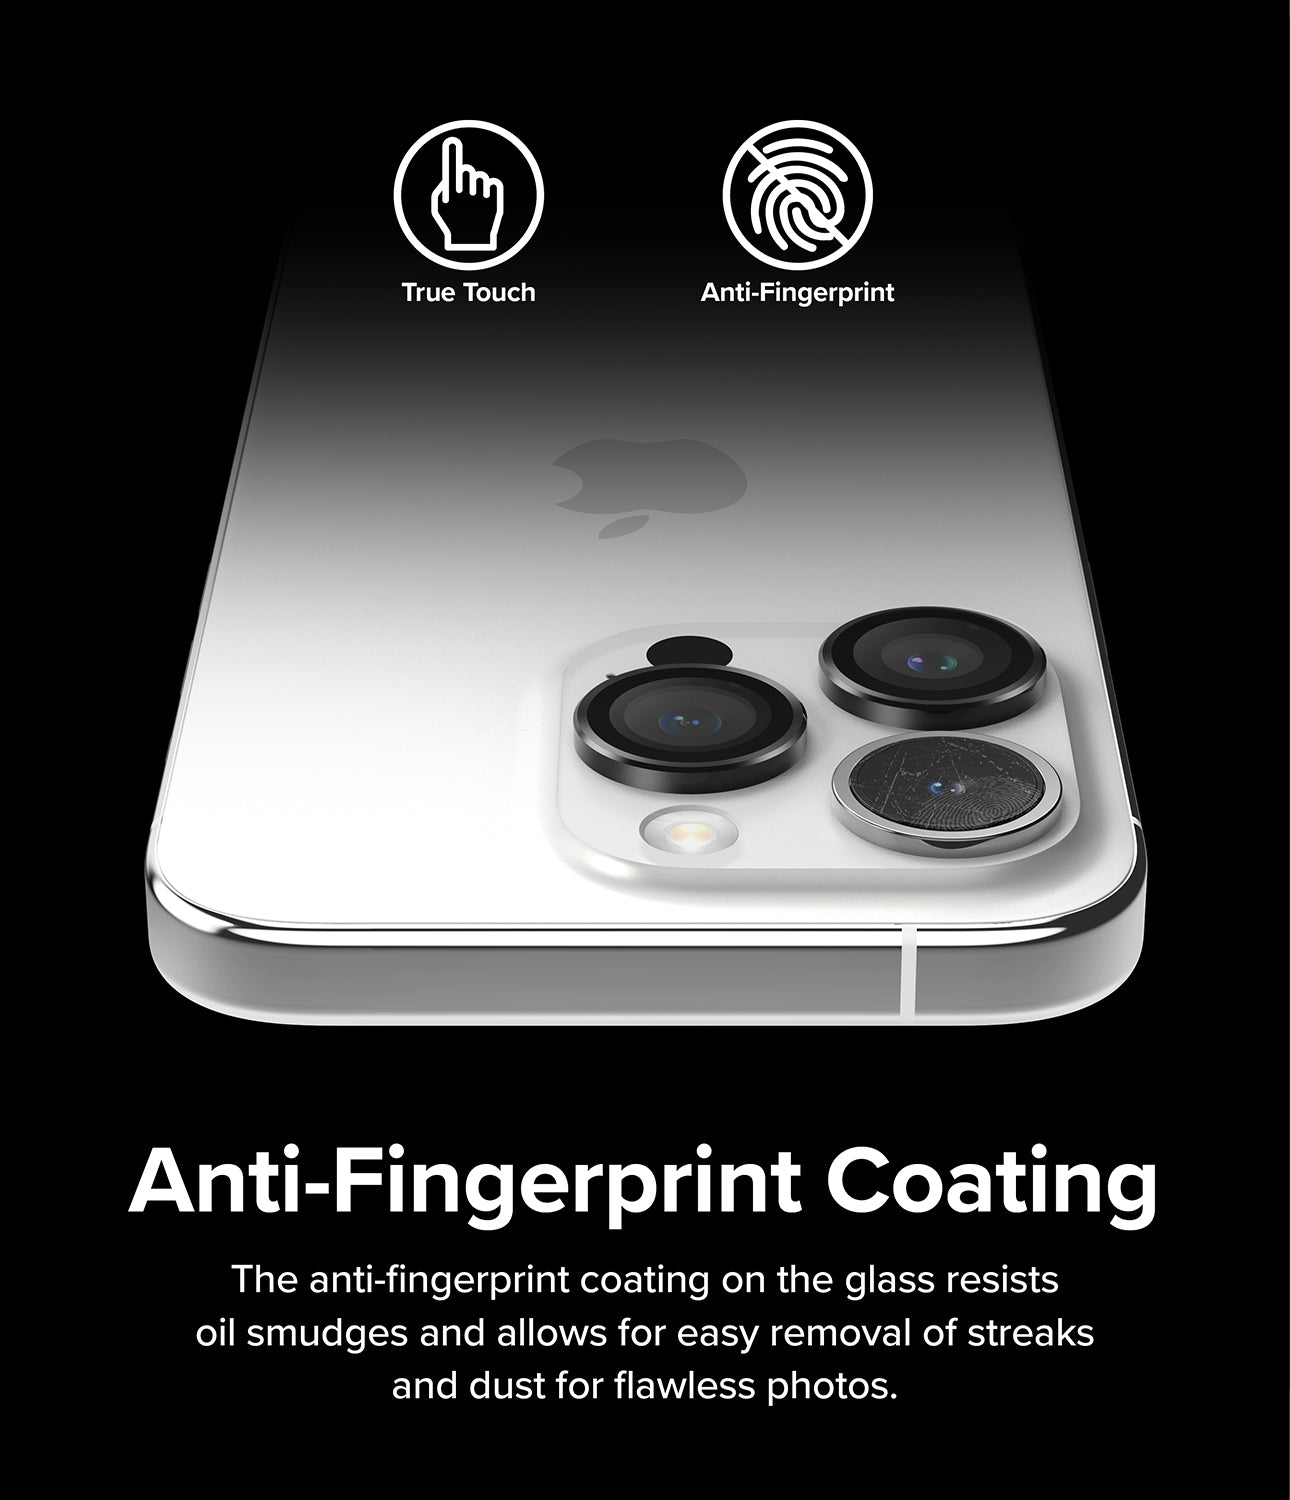 iPhone 15 Pro Max | Camera Lens Frame Glass - Anti-Fingerprint Coating. The anti-fingerprint coating on the glass resists oil smudges and allows for easy removal of streaks and dust for flawless photos.